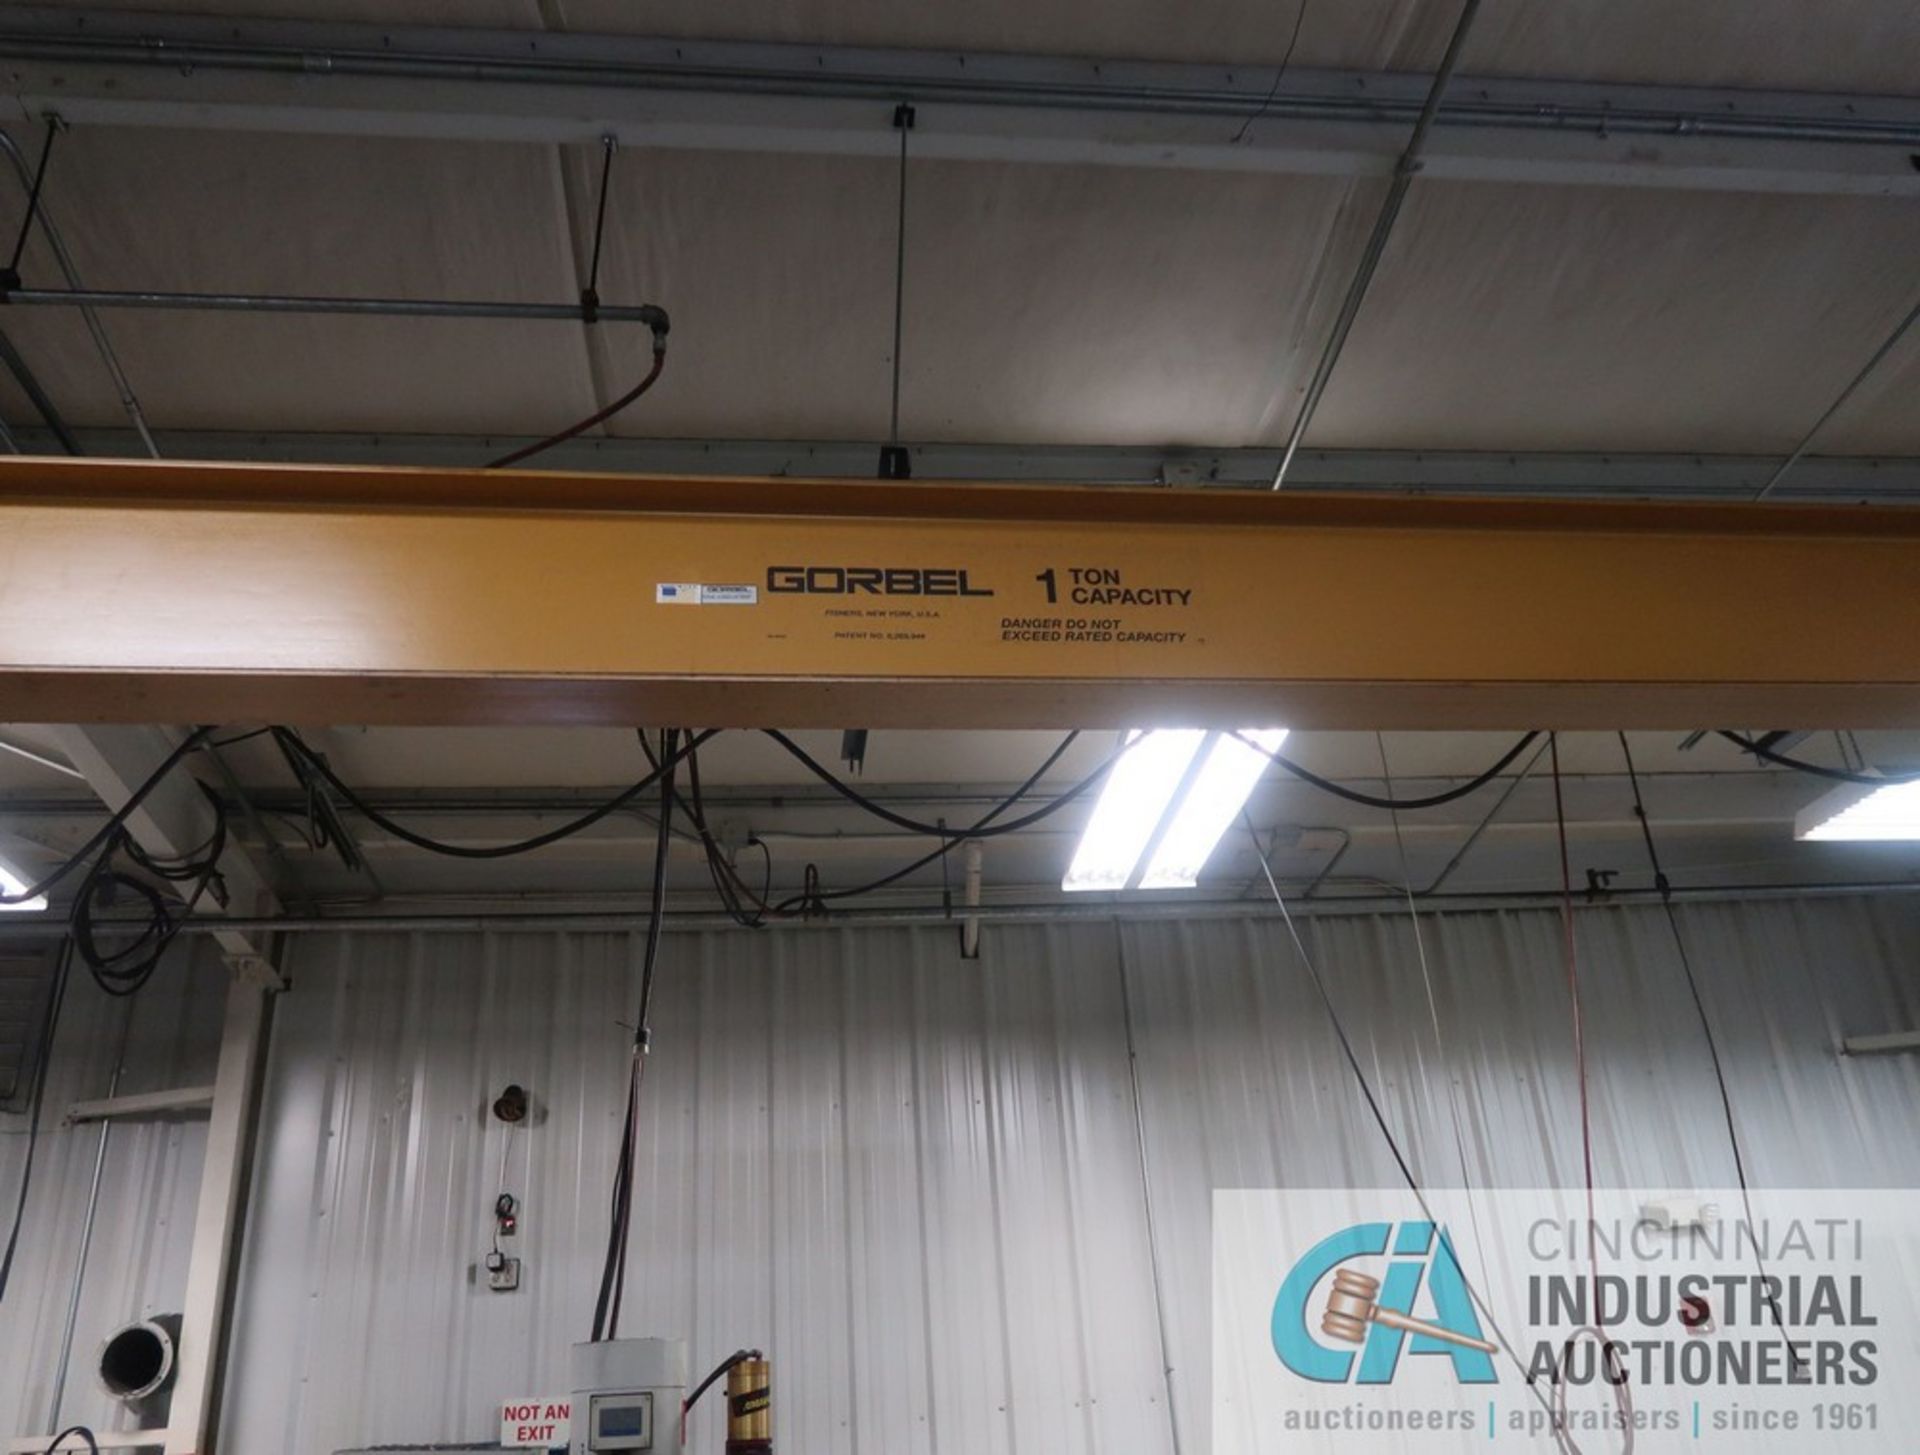 1 TON CAPACITY X 18' ARM (APPROX.) GORBEL FREE-STANDING JIB CRANE WITH 1 TON BUDGIT PENDANT - Image 6 of 6